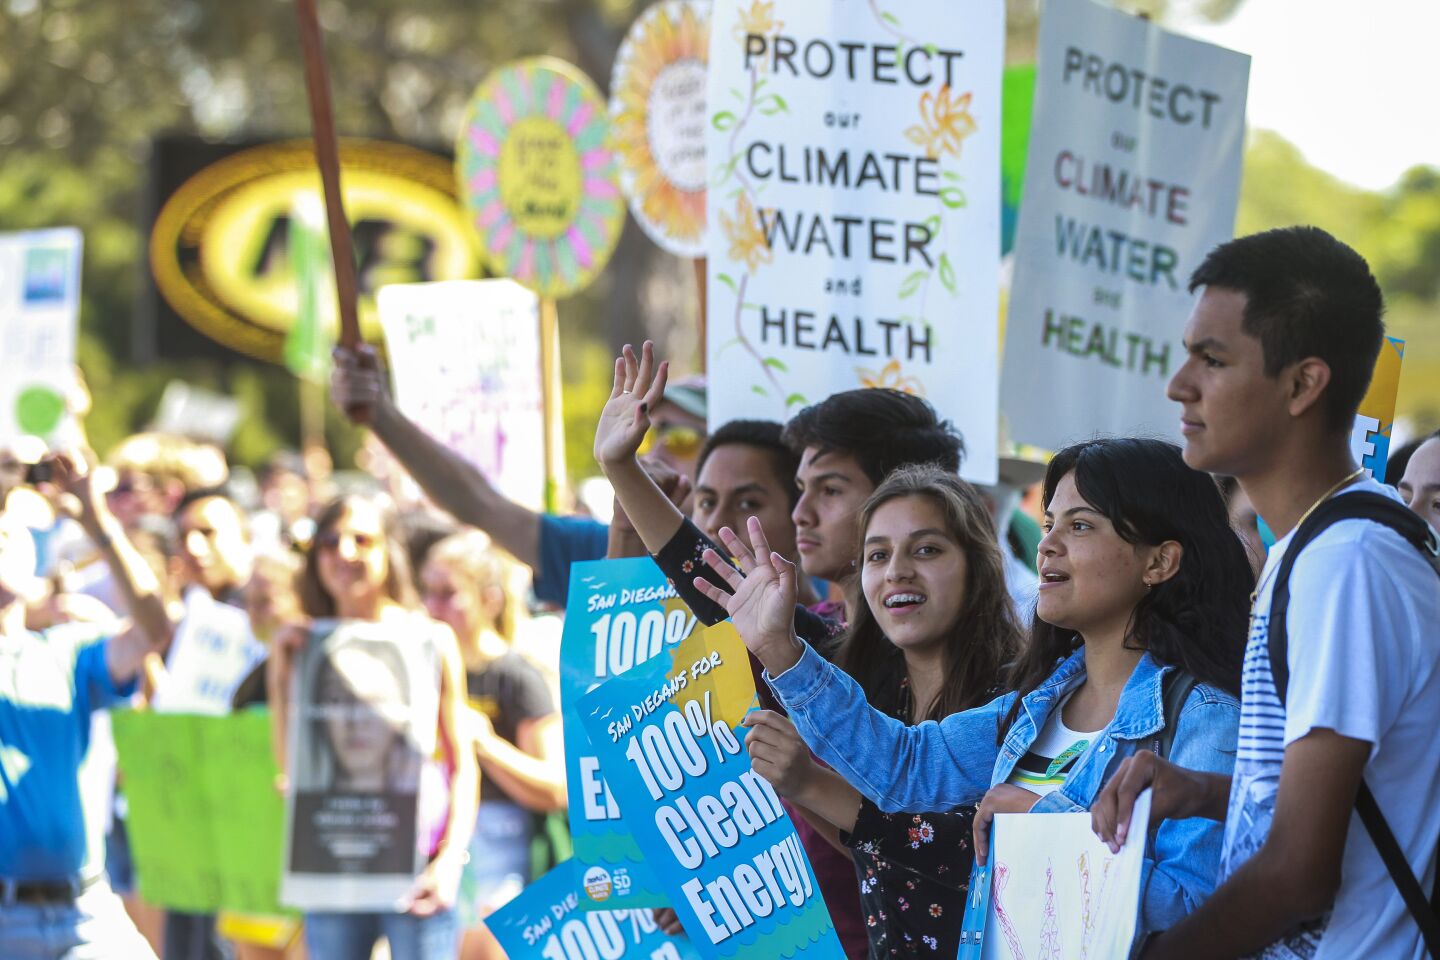 Students cheer and wave to cars honking in support as a large crowd of students gather in front of Mission Bay High School after they walked out of classes to participate in the Global Climate Strike in Pacific Beach on Friday, September 20, 2019 in San Diego, California.